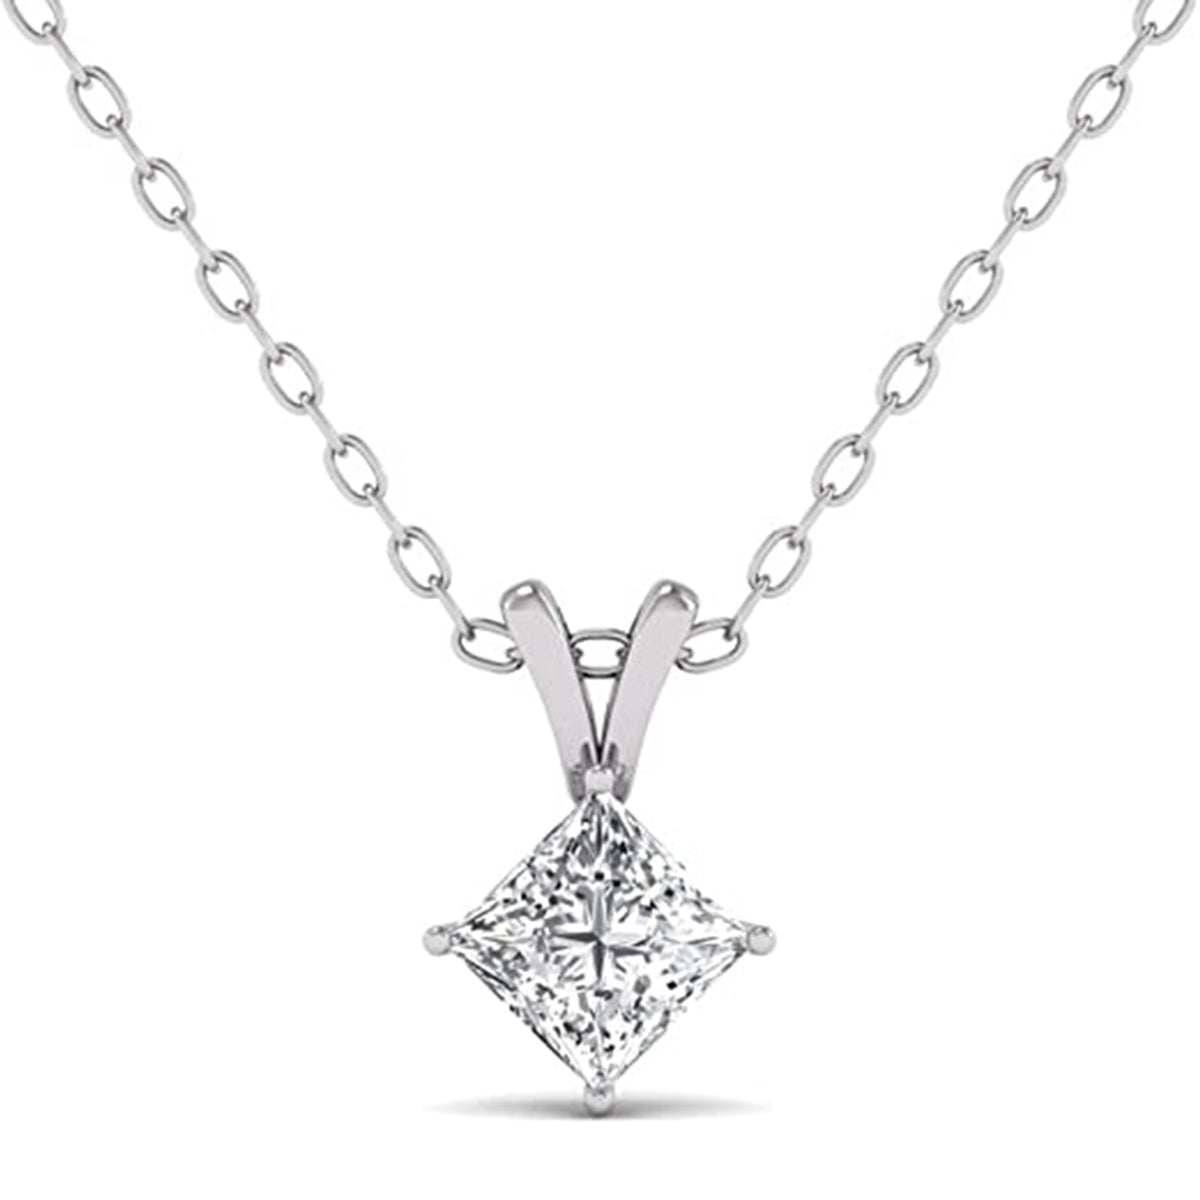 1 CARAT TW Princess Cut Natural Diamond 4-Prong Solitaire Pendant Available in 14K White Gold (J-K Color, I2-I3 Clarity)